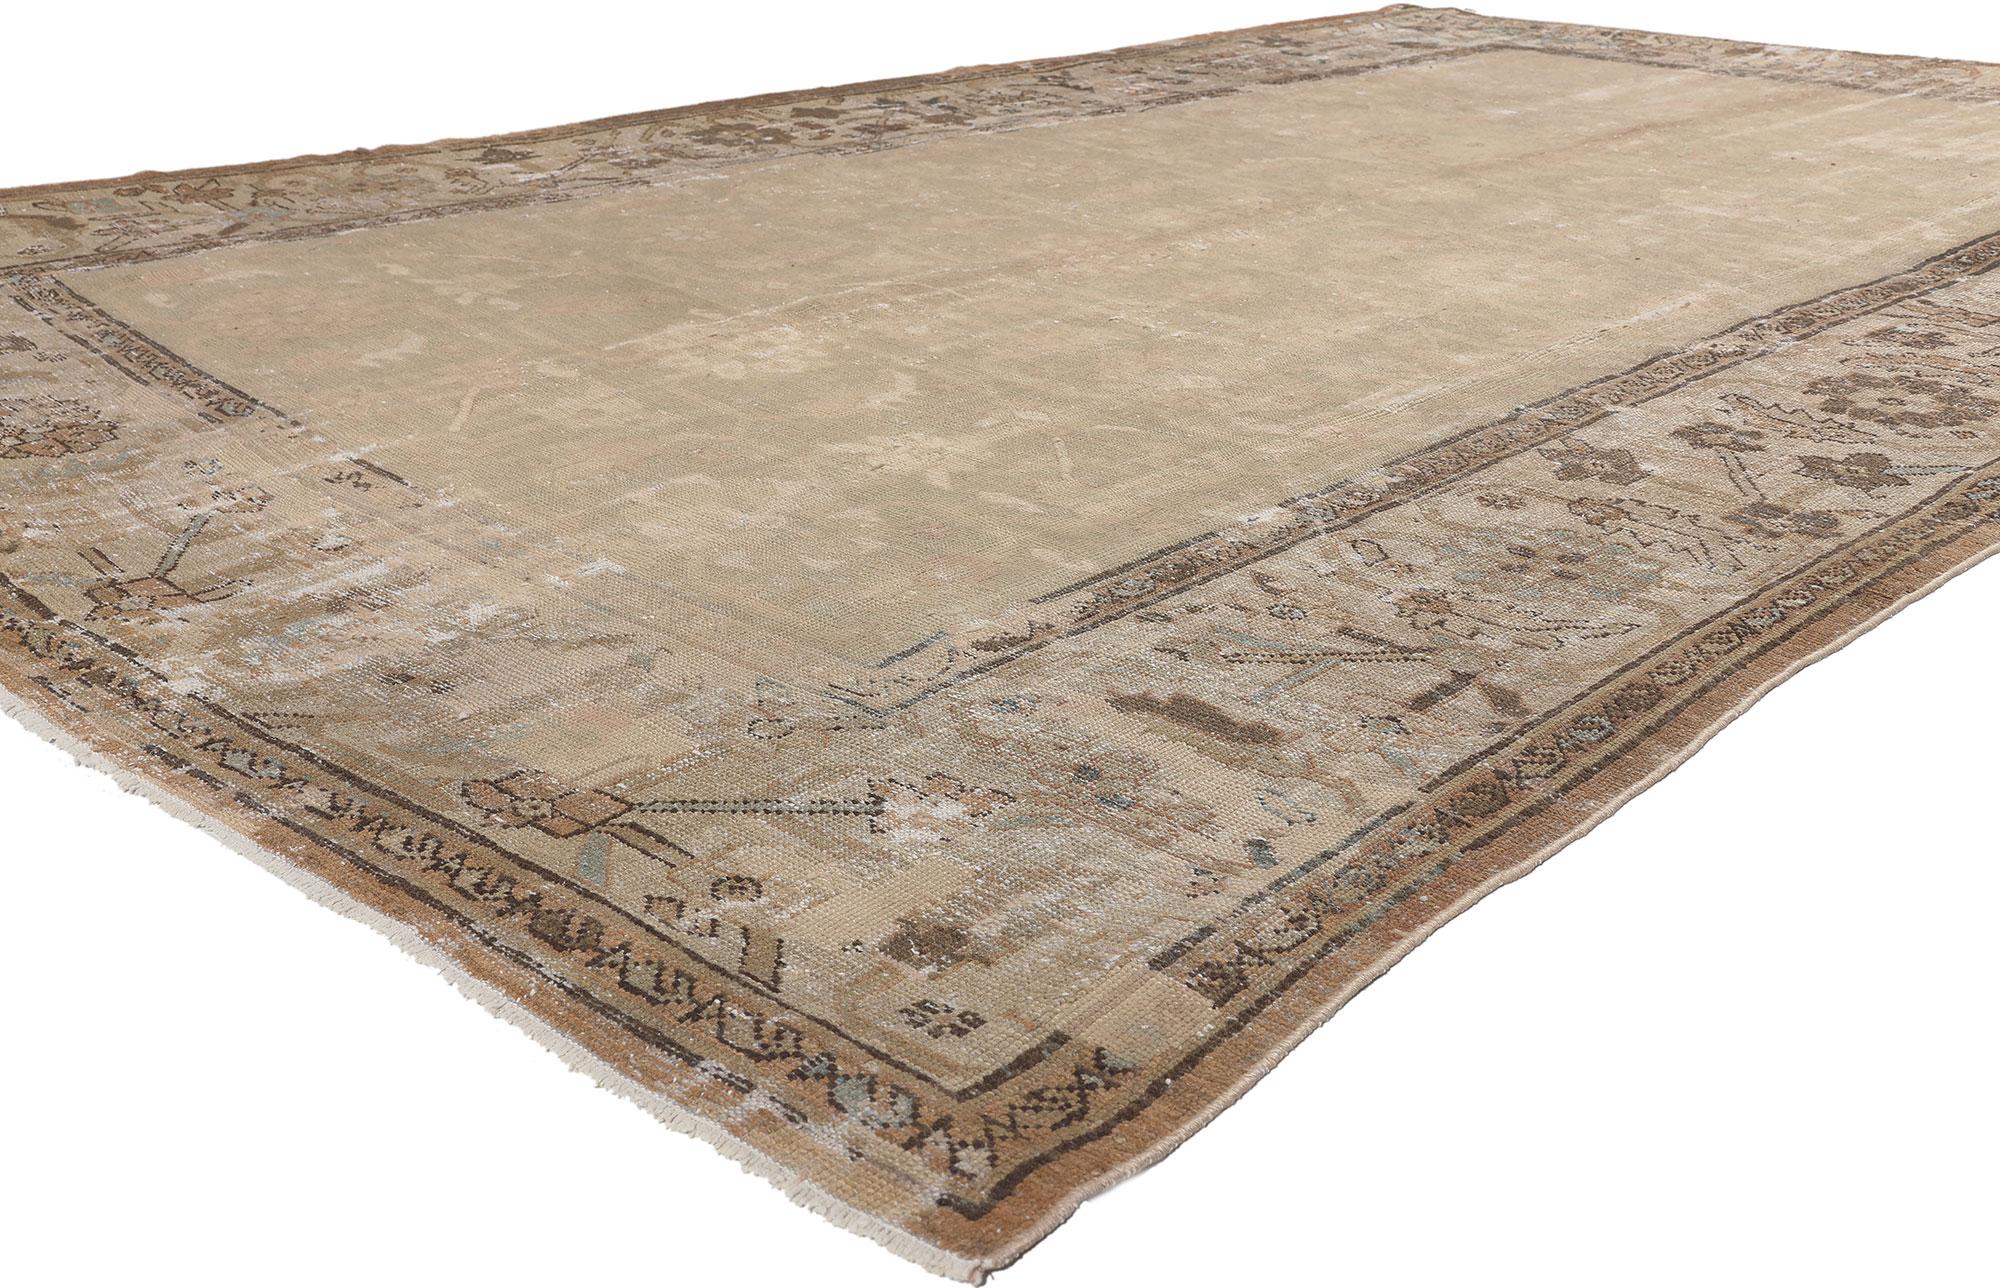 76600 Antique-Worn Persian Mahal Rug, 07'06 x 11'08. 
Weathered charm meets rustic sensibility in this distressed antique-worrn Persian Mahal rug. The faded floral design and neutral earth-tone colors woven into this piece work together creating a